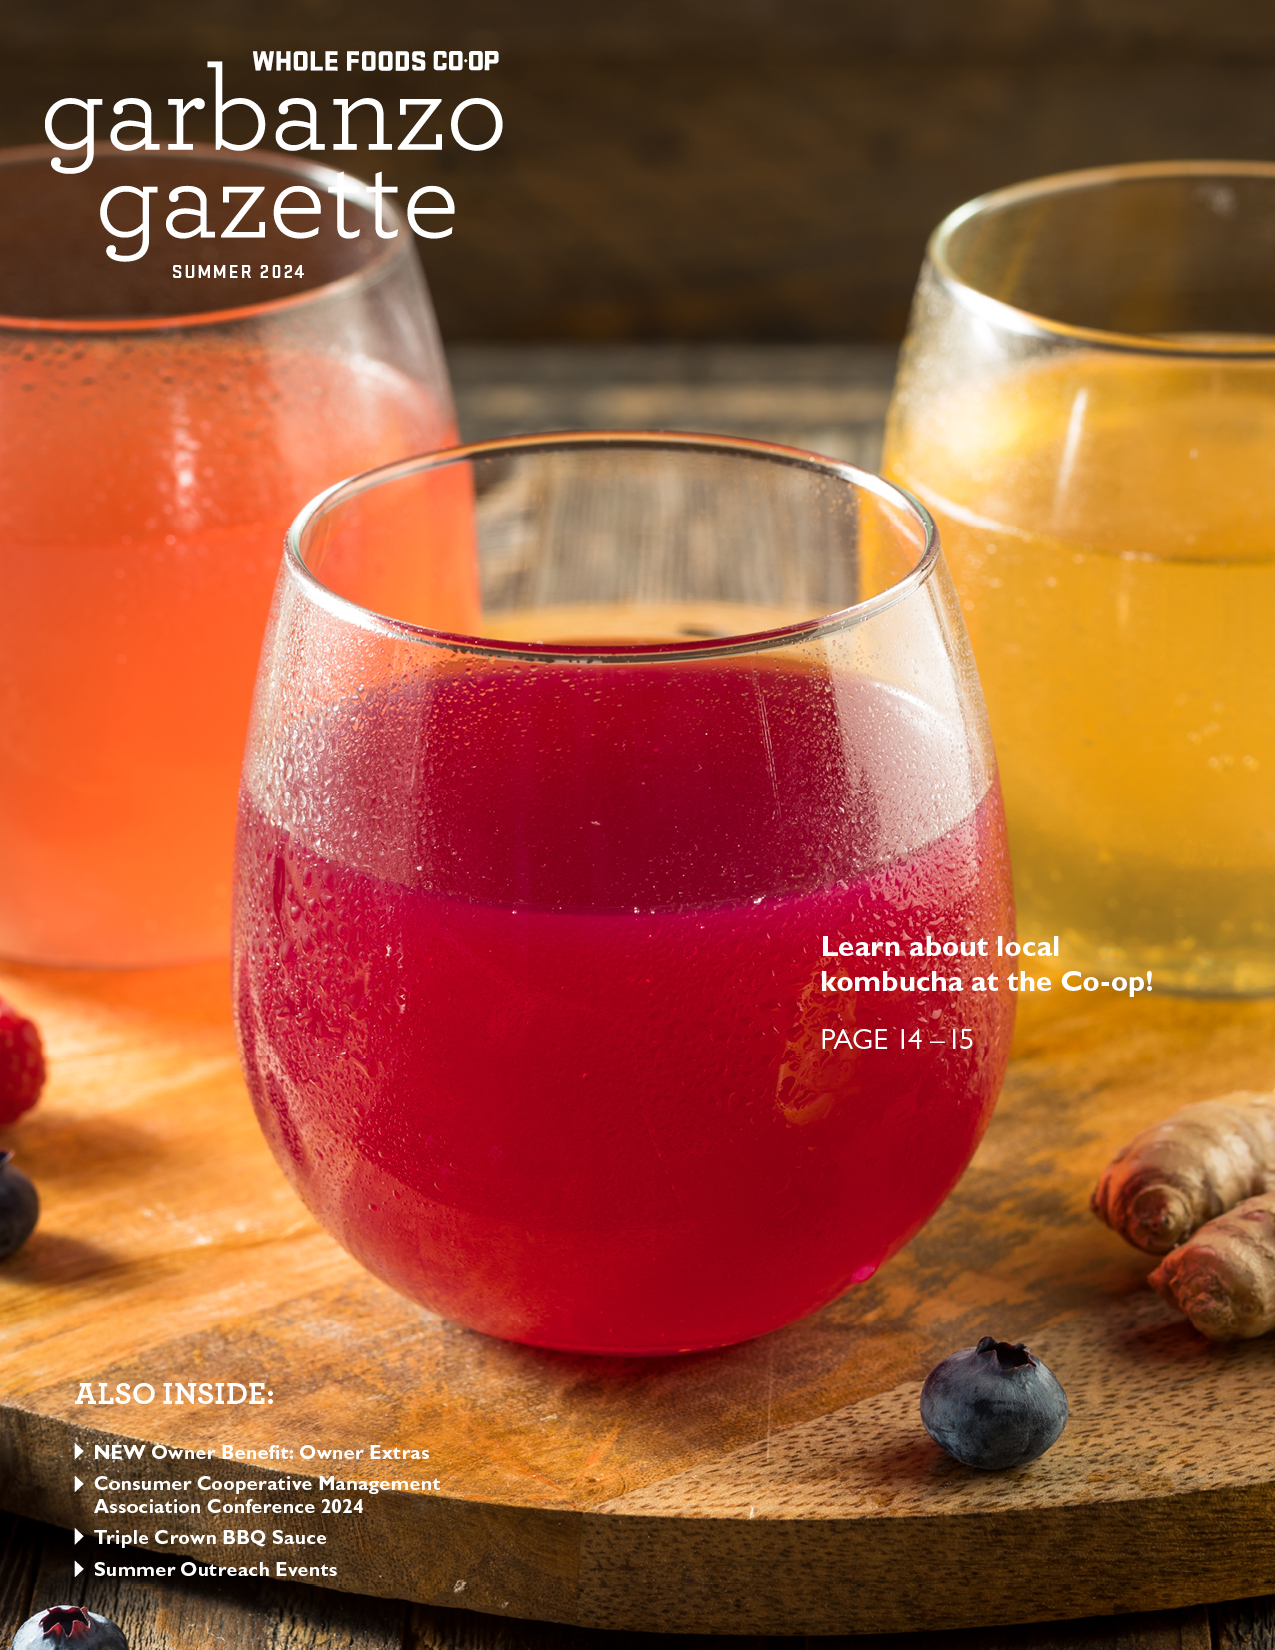 Cover of the Summer 2024 Garbanzo Gazette featuring three glasses of kombucha, each a different color.